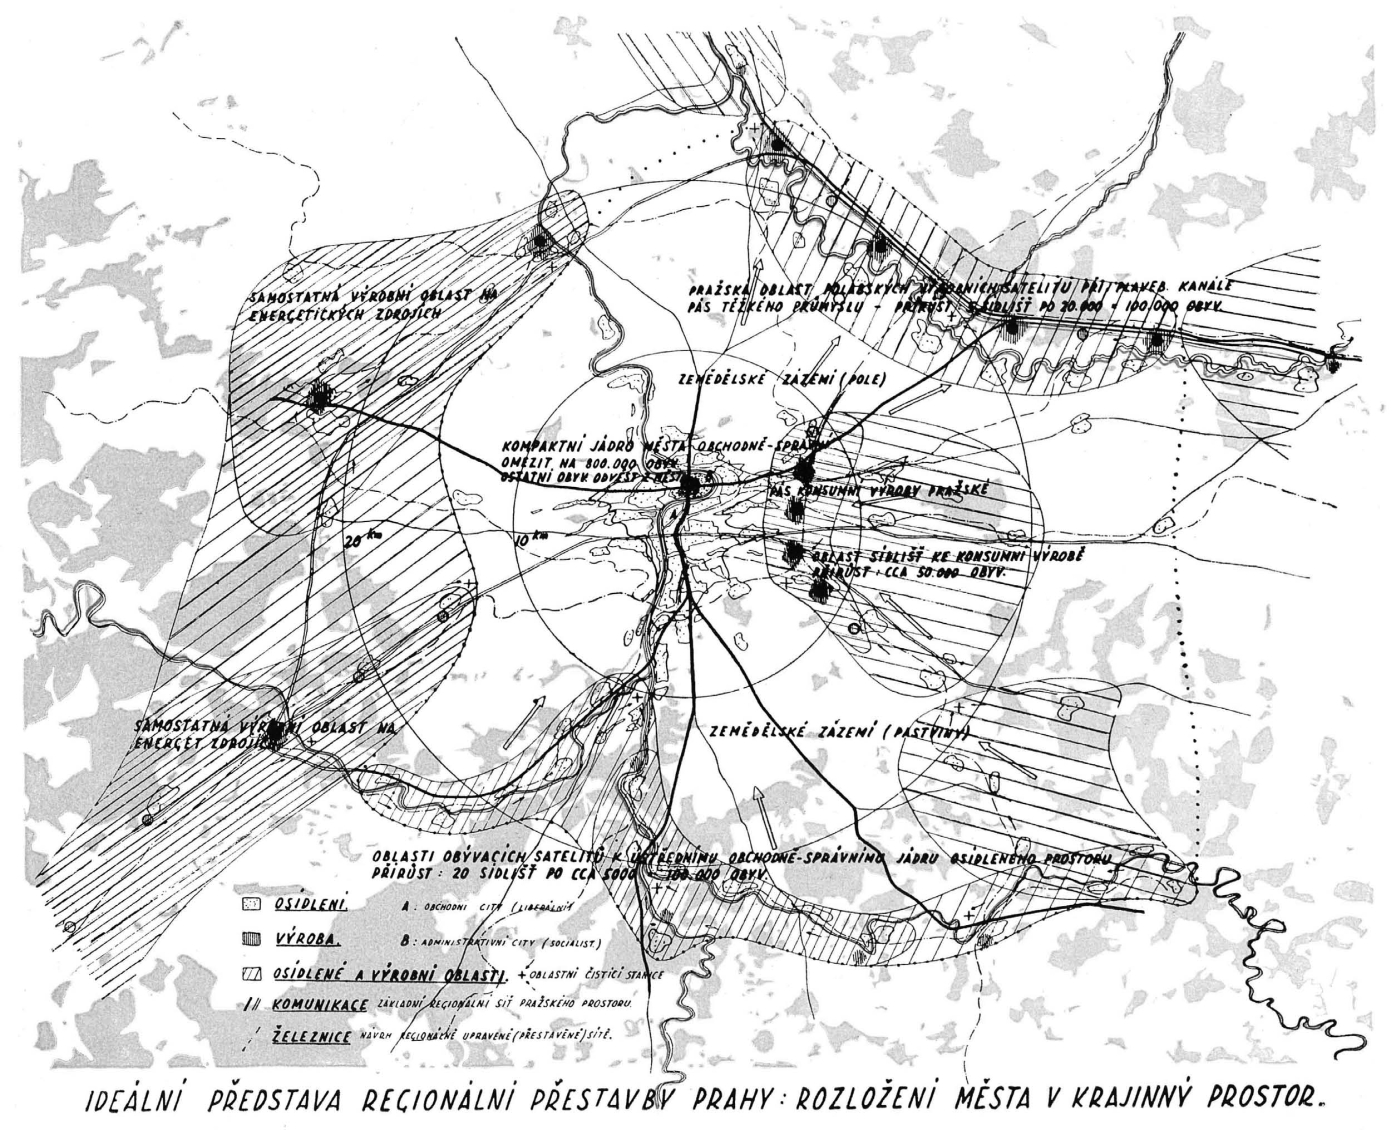 The Czech Discourse on Regional Planning Between 1945 and 1948